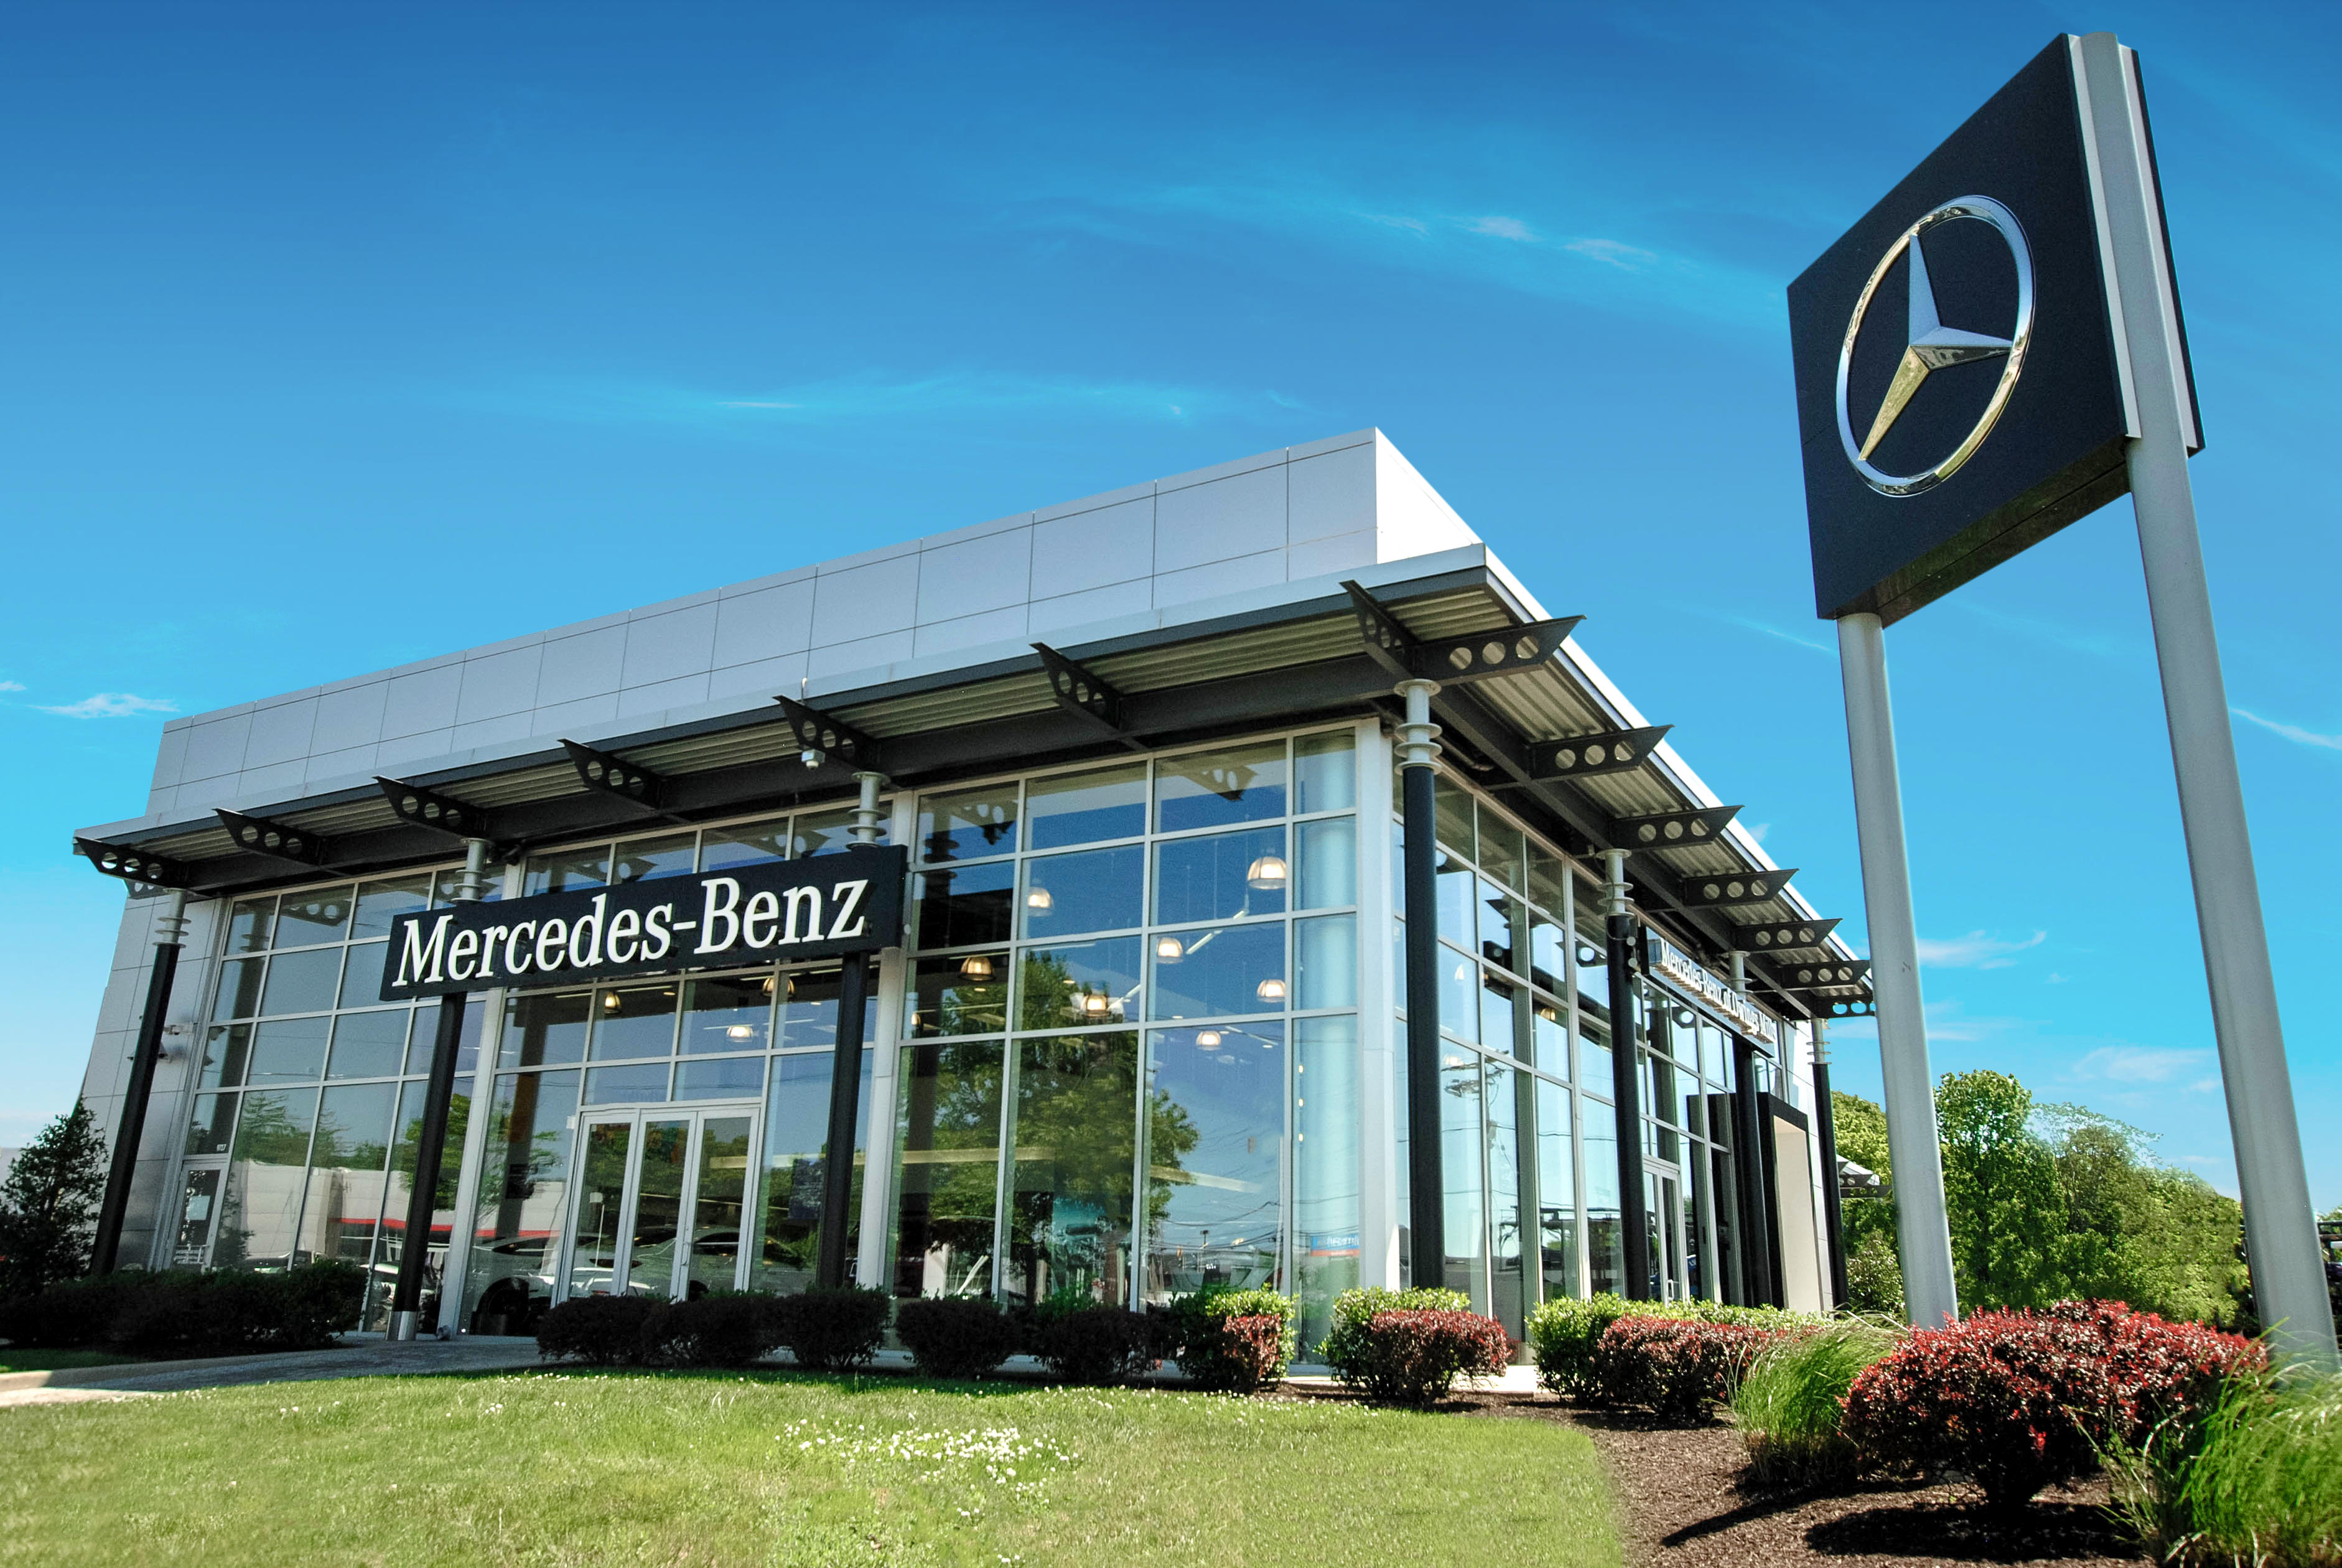 Mercedes-Benz of Owings Mills - Owings Mills, MD 21117 - (844)342-3678 | ShowMeLocal.com